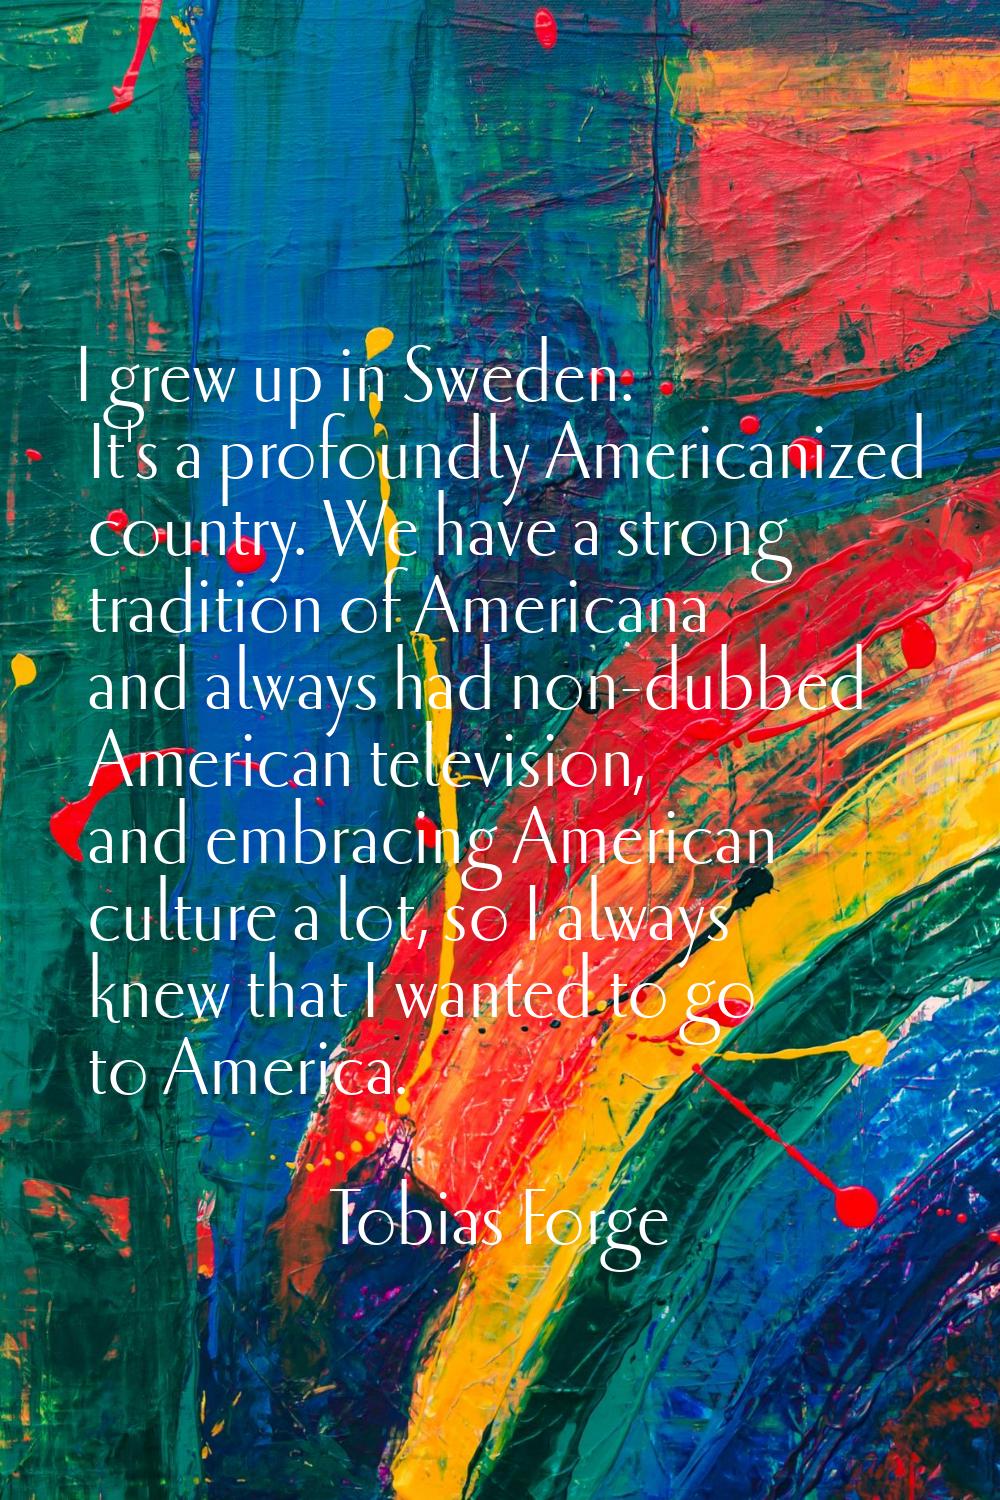 I grew up in Sweden. It's a profoundly Americanized country. We have a strong tradition of American